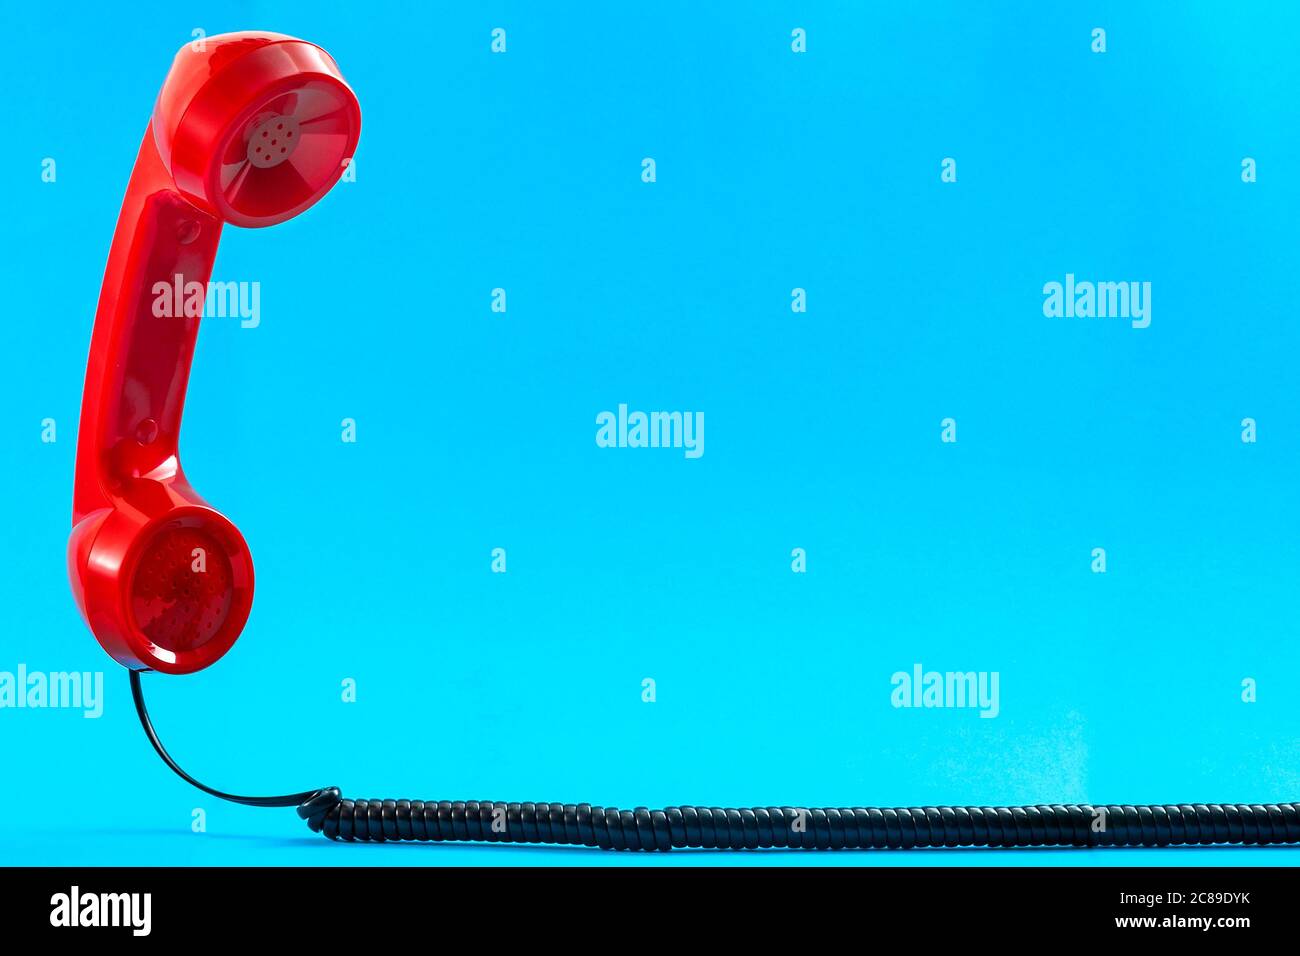 Contact us concept and floating phone receiver with a vintage red telephone handset floating above the curly cable isolated on blue background with co Stock Photo